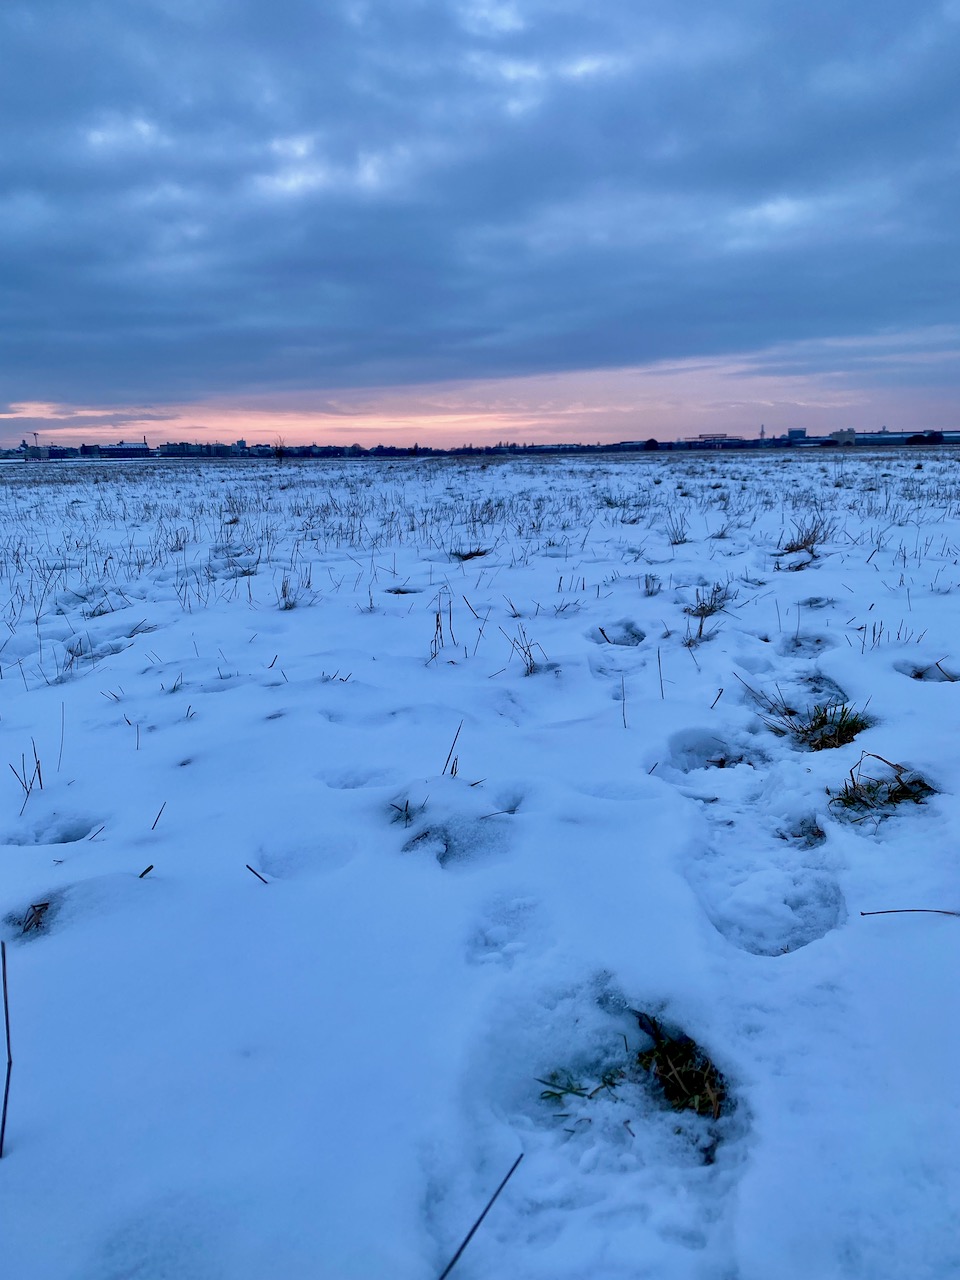 The sliver of sunset, dusty pink sky in a snow covered field.